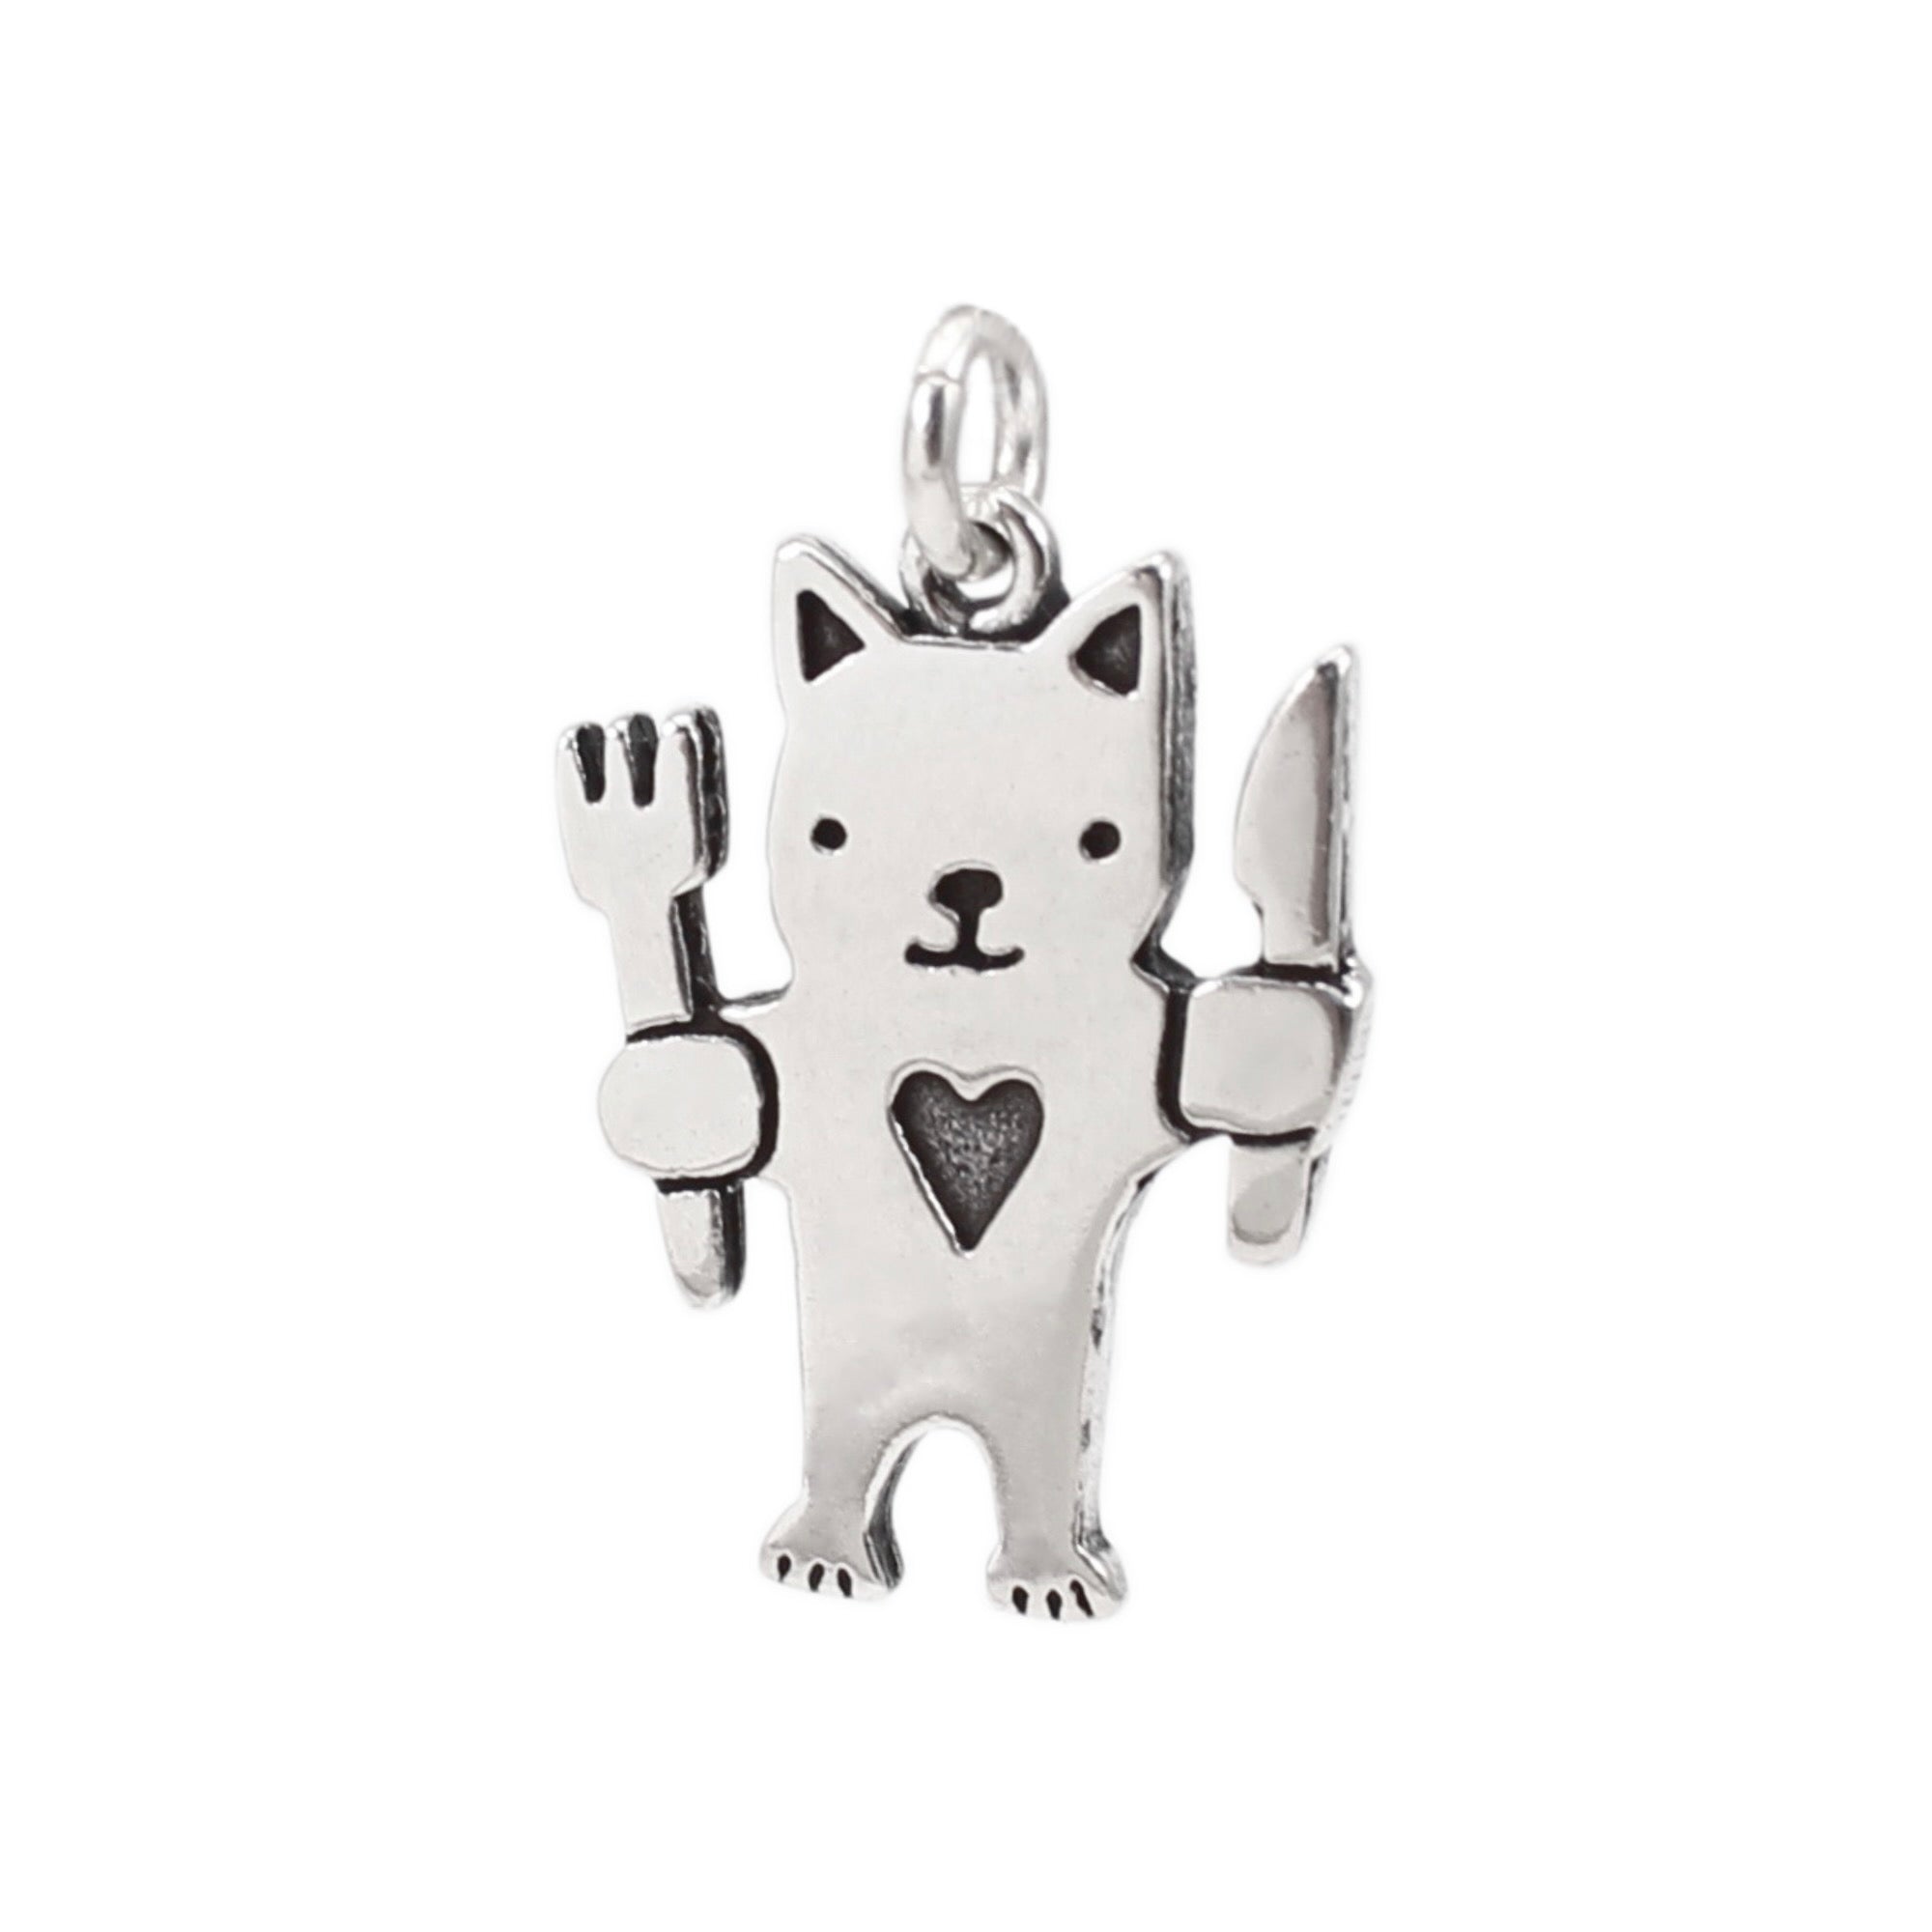 Cat Charm - Choose Your Sterling Silver Cat Charm to Add to